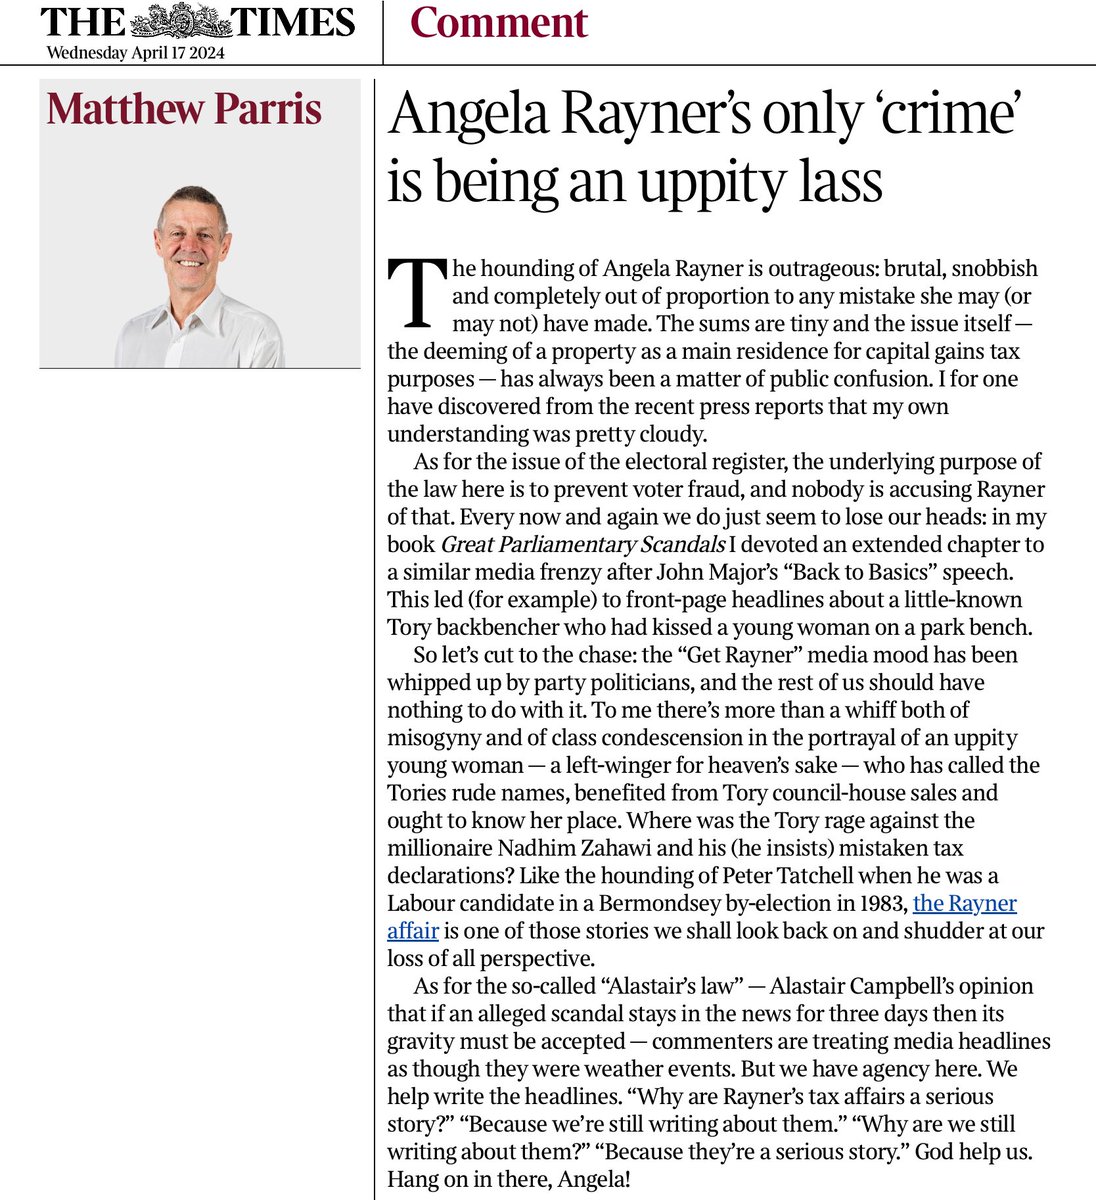 @carolvorders Much good sense from Matthew Parris in the @thetimes today about the media hypocrisy exaggerating wildly the significance of allegations against Angela Rayner